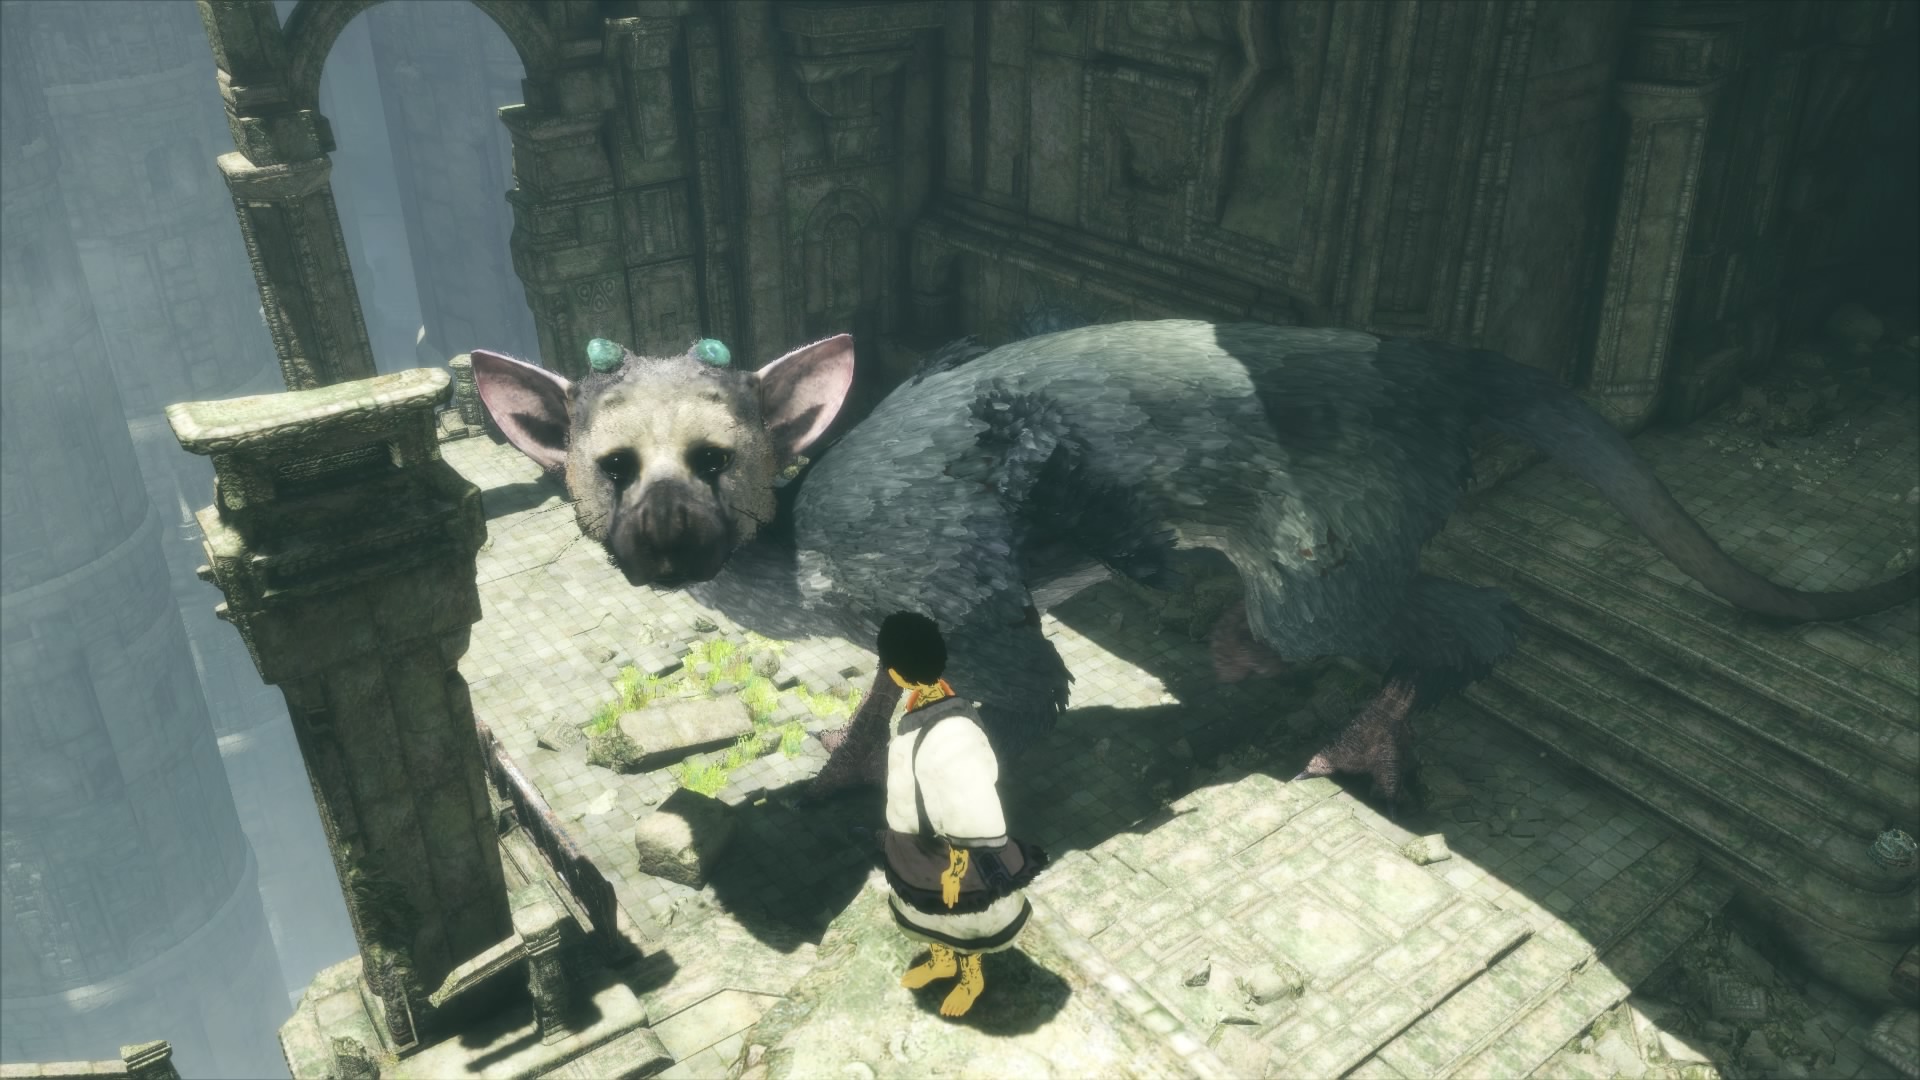 Torgo's Review of The Last Guardian